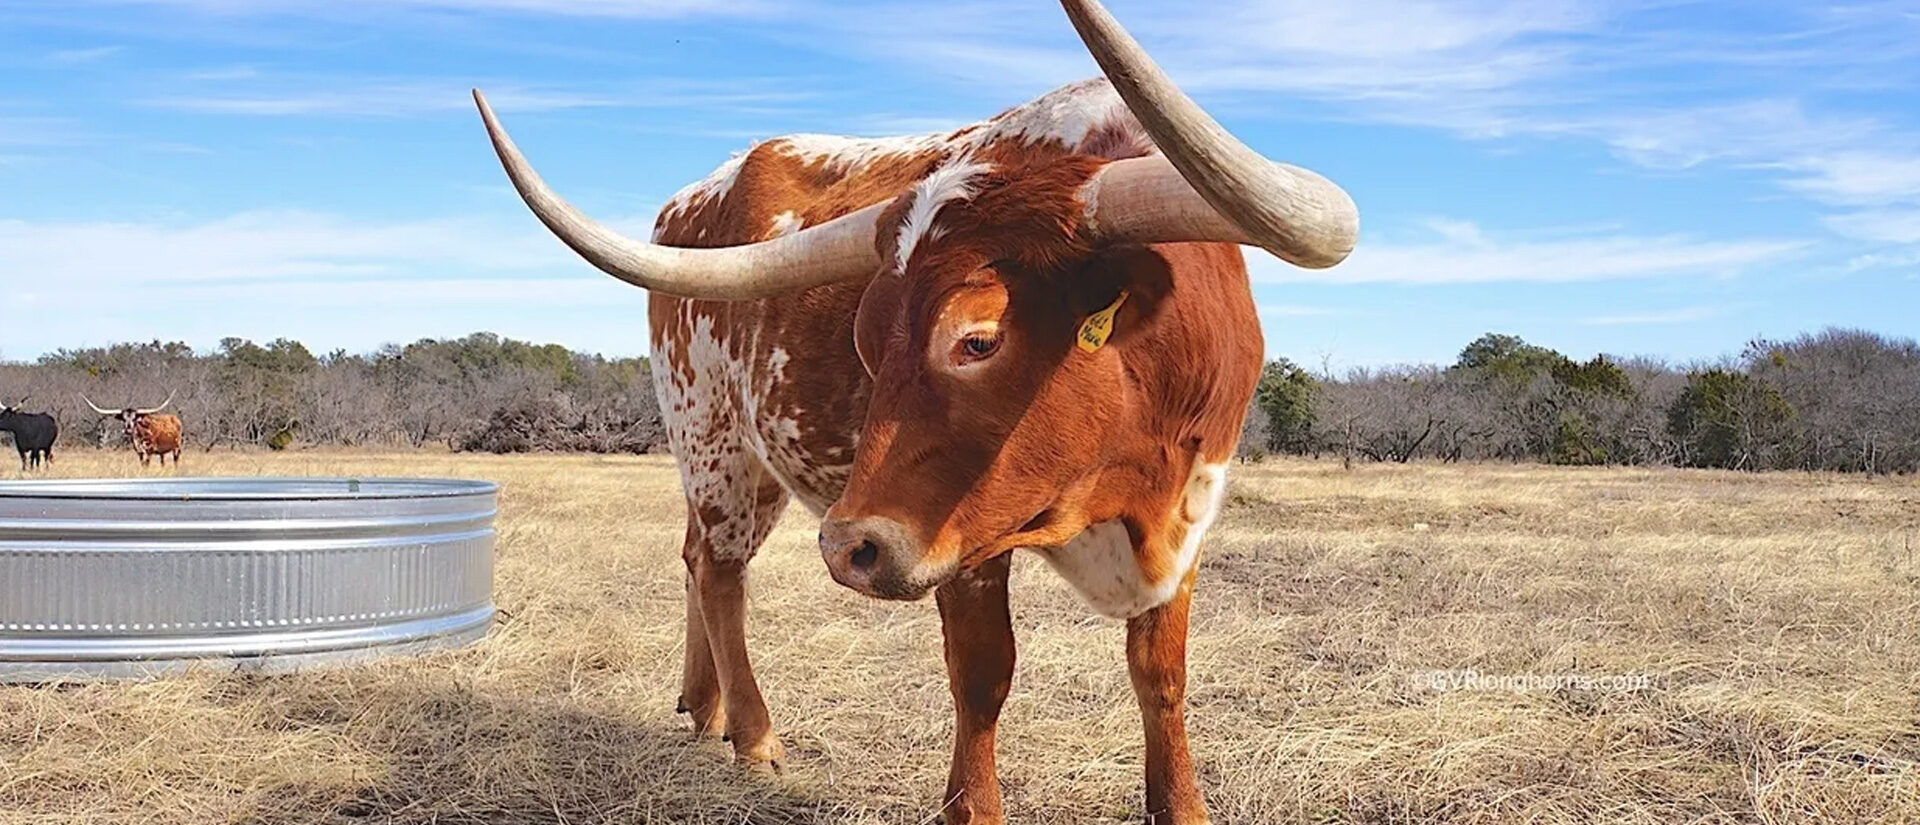 Longhorn Cattle in Texas Pasture